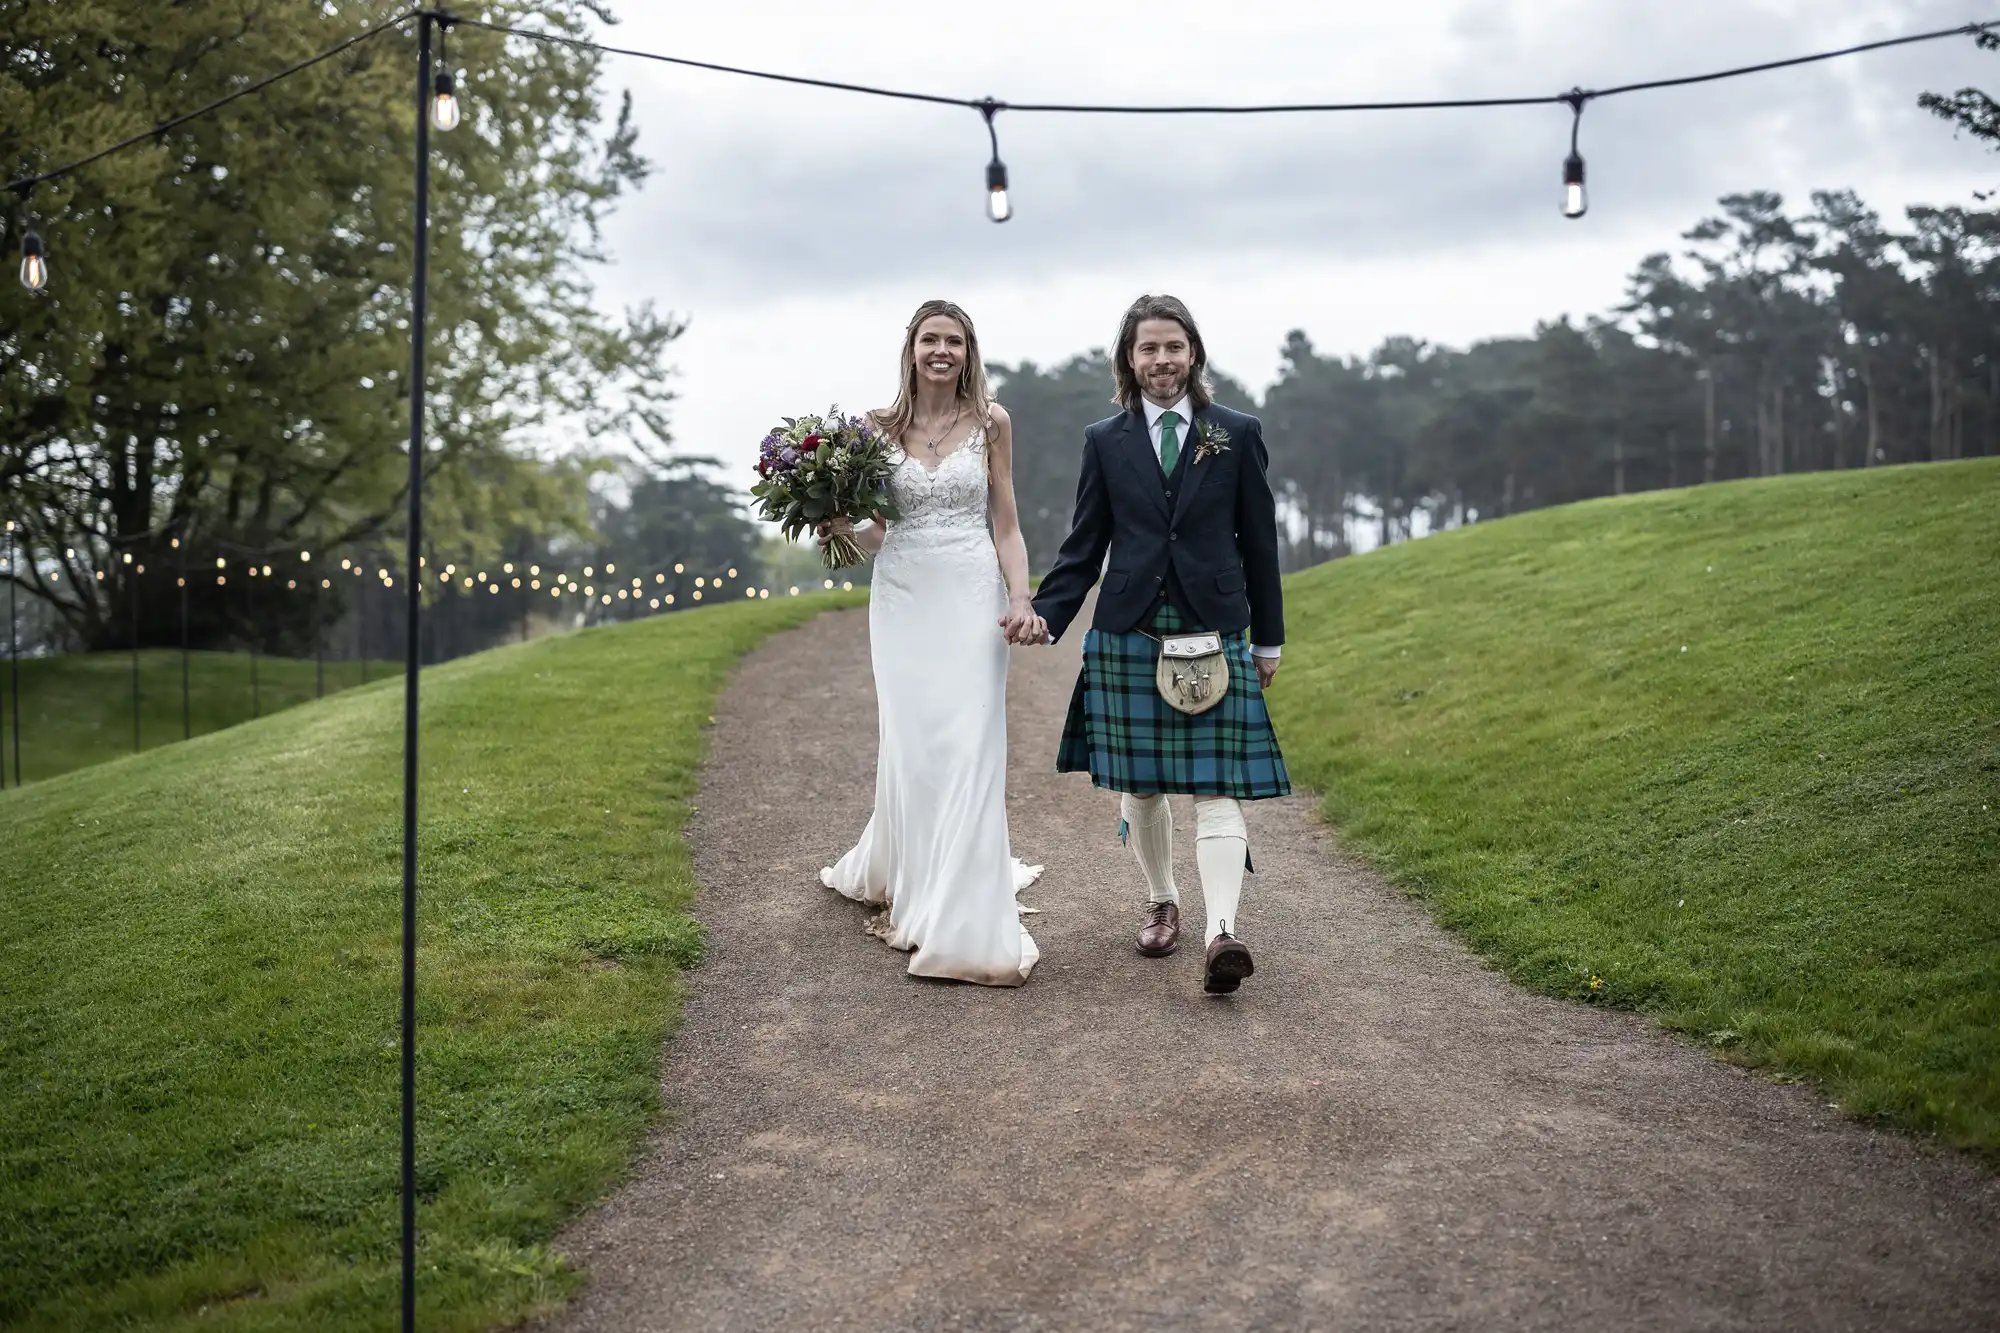 A bride in a white dress and a groom in a kilt walk down an outdoor path lined with string lights, surrounded by green grass and trees.